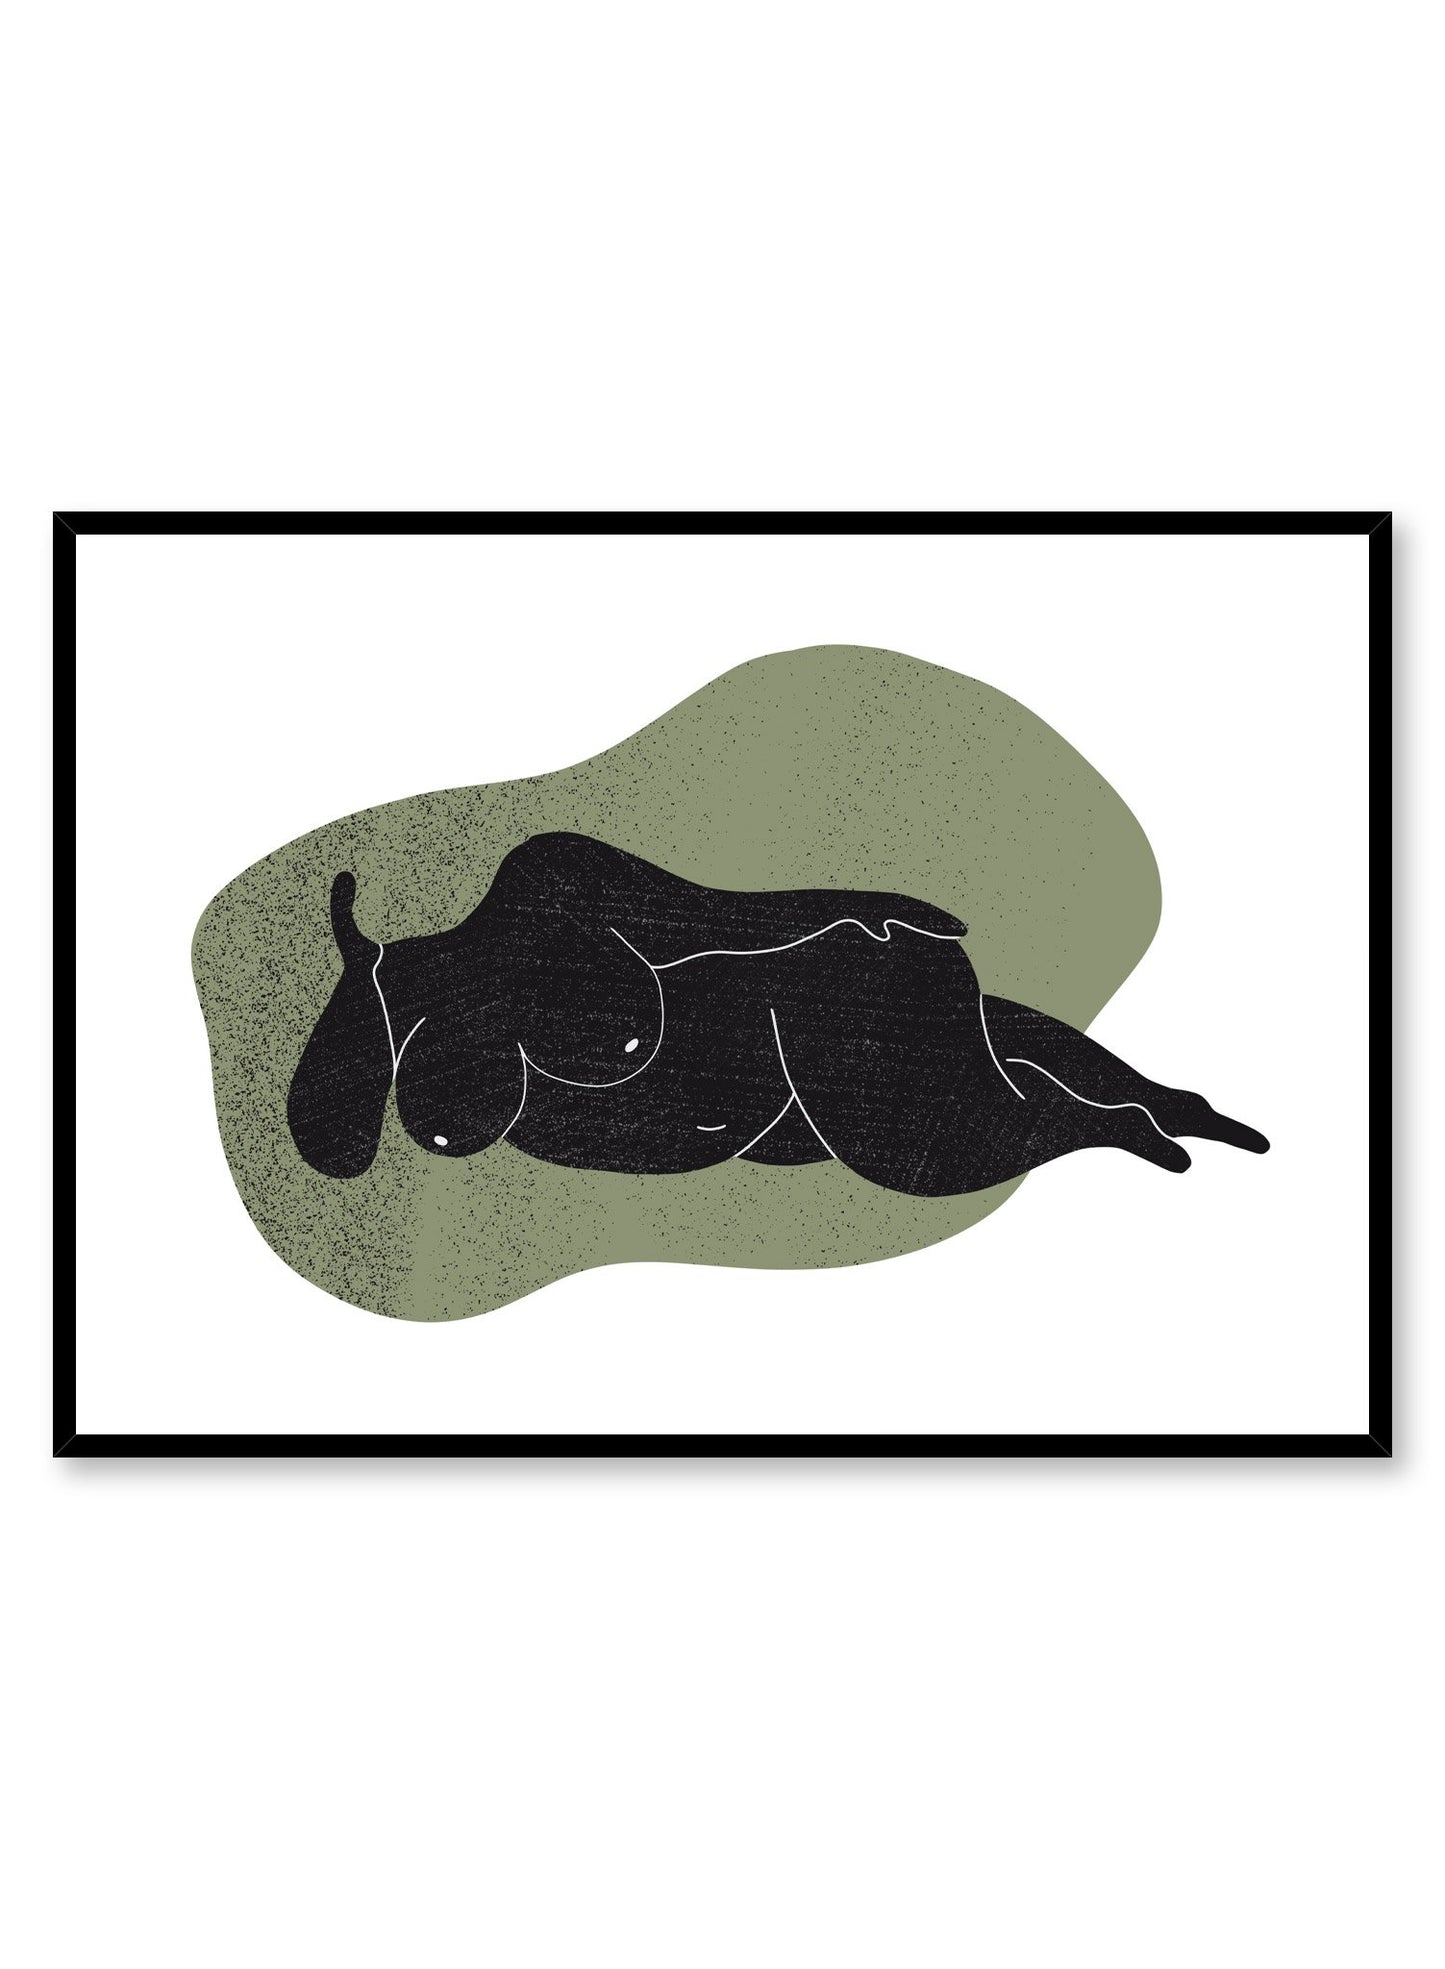 "Voluptuous Nude" is a minimalist black, green and white illustration poster by Opposite Wall of curvy and abstract female nude lying down superimposed over a white and green background. 